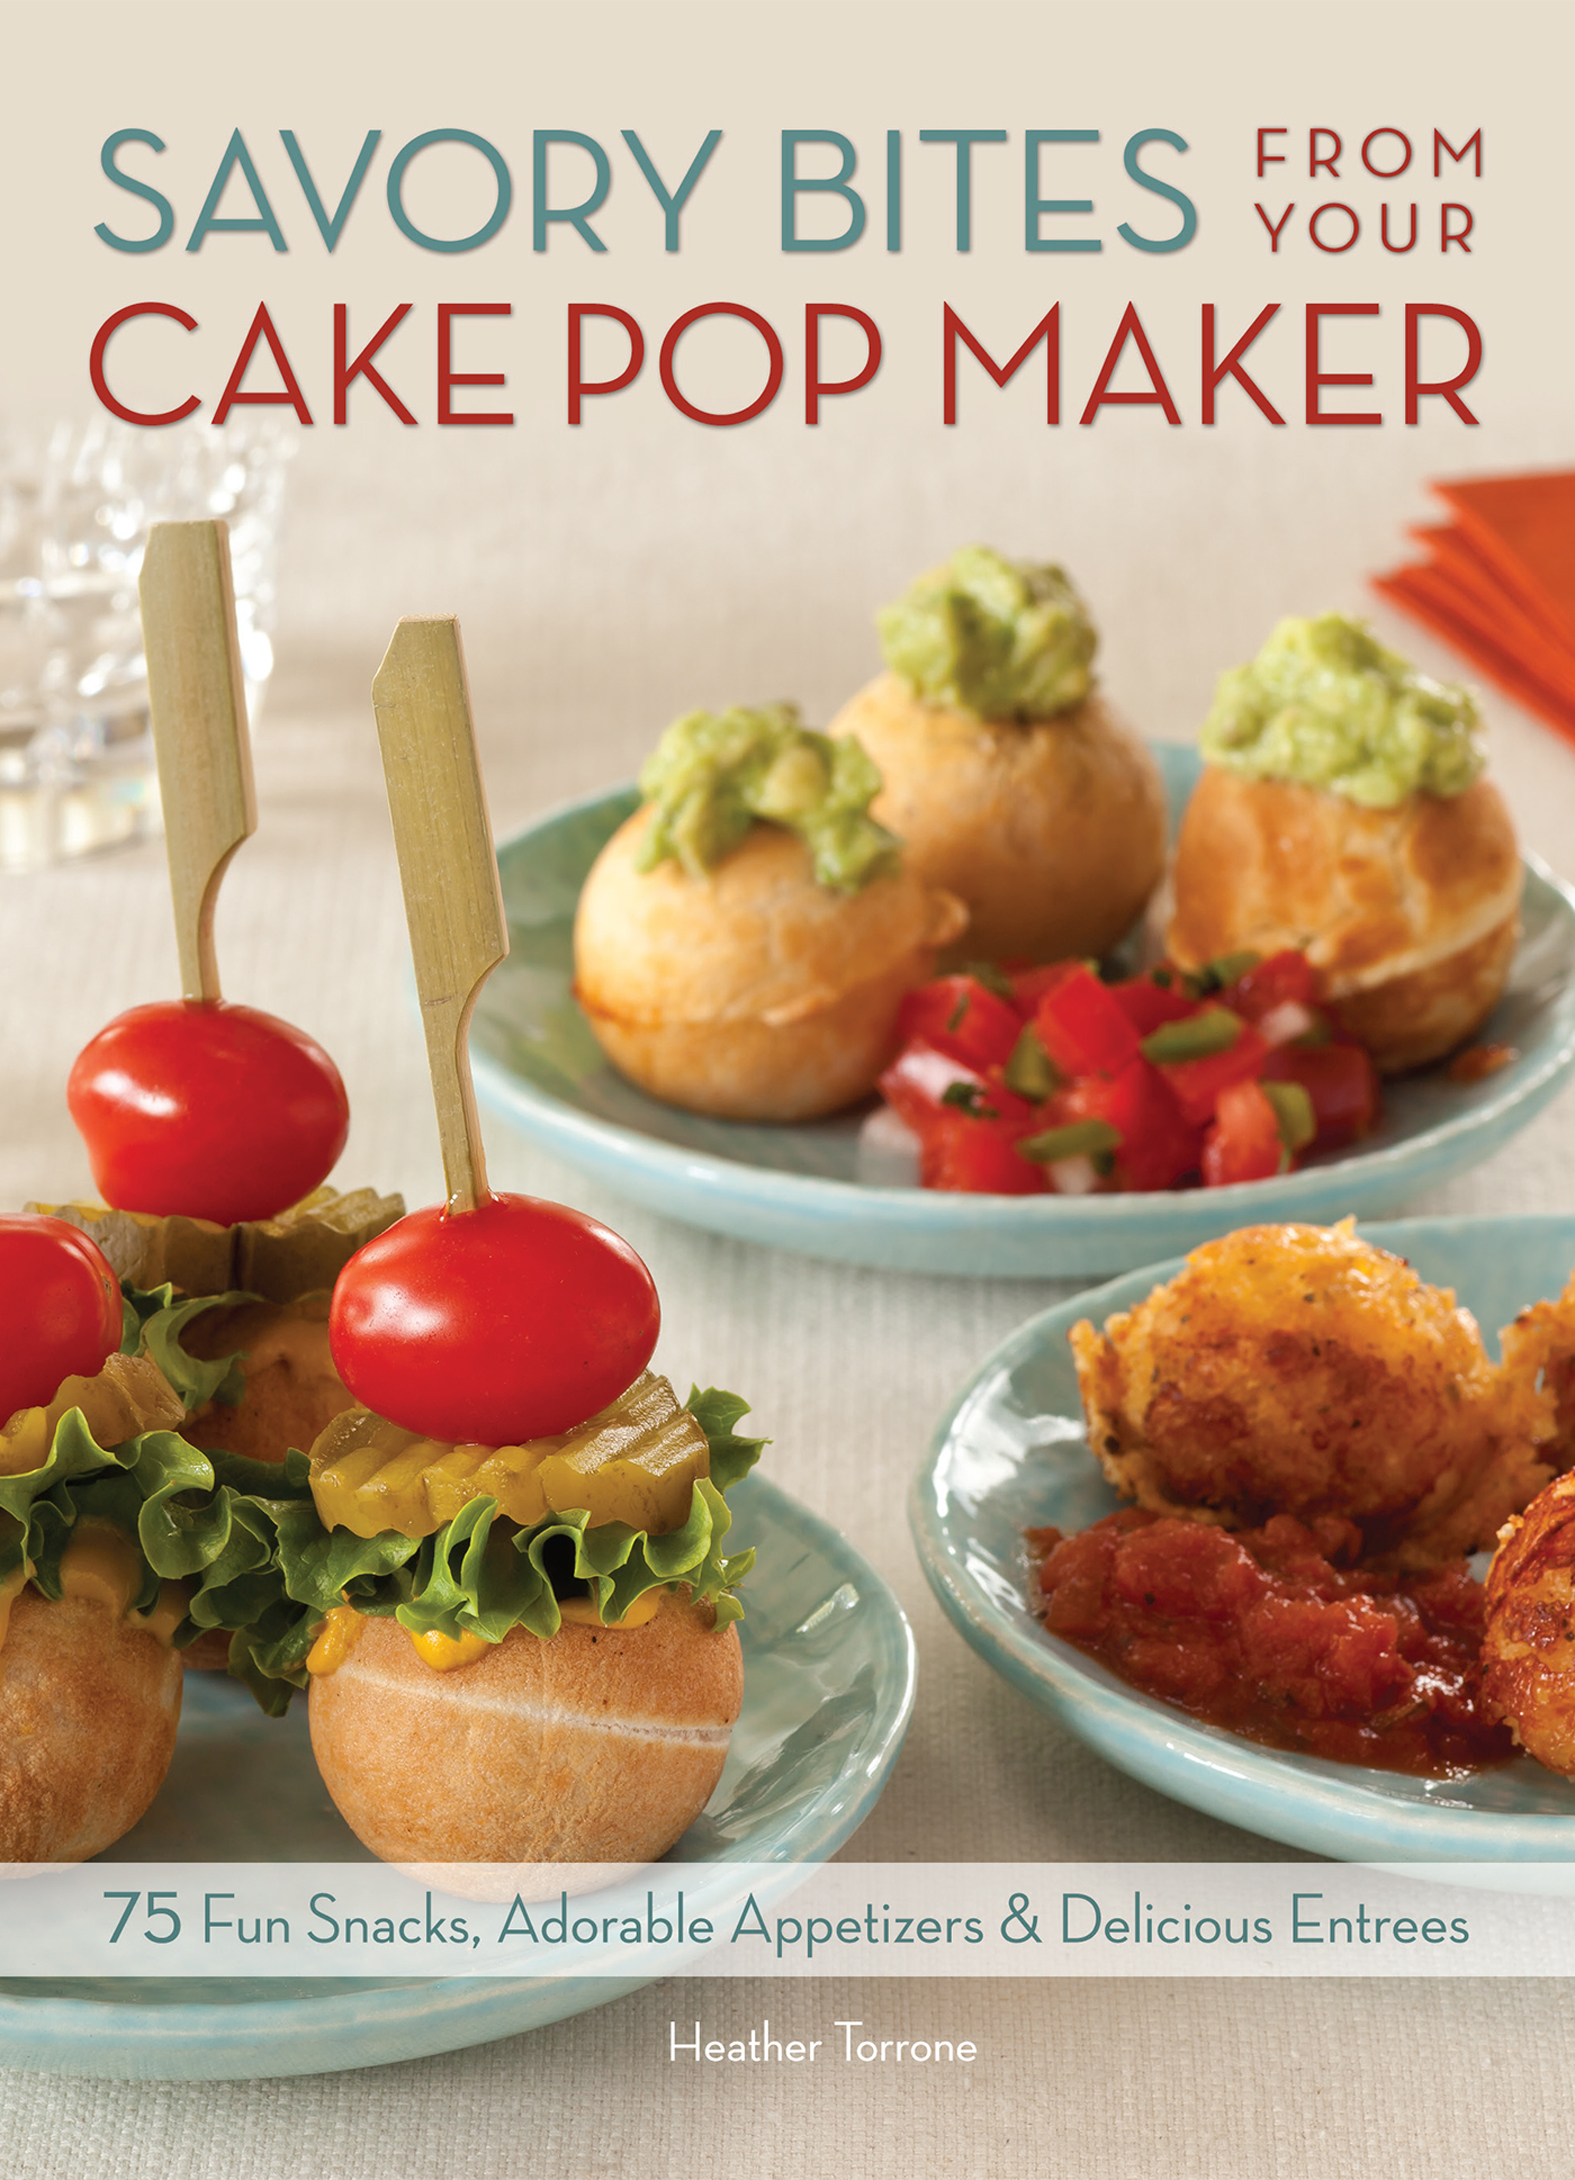 Savory Bites From Your Cake Pop Maker - 15-24.99